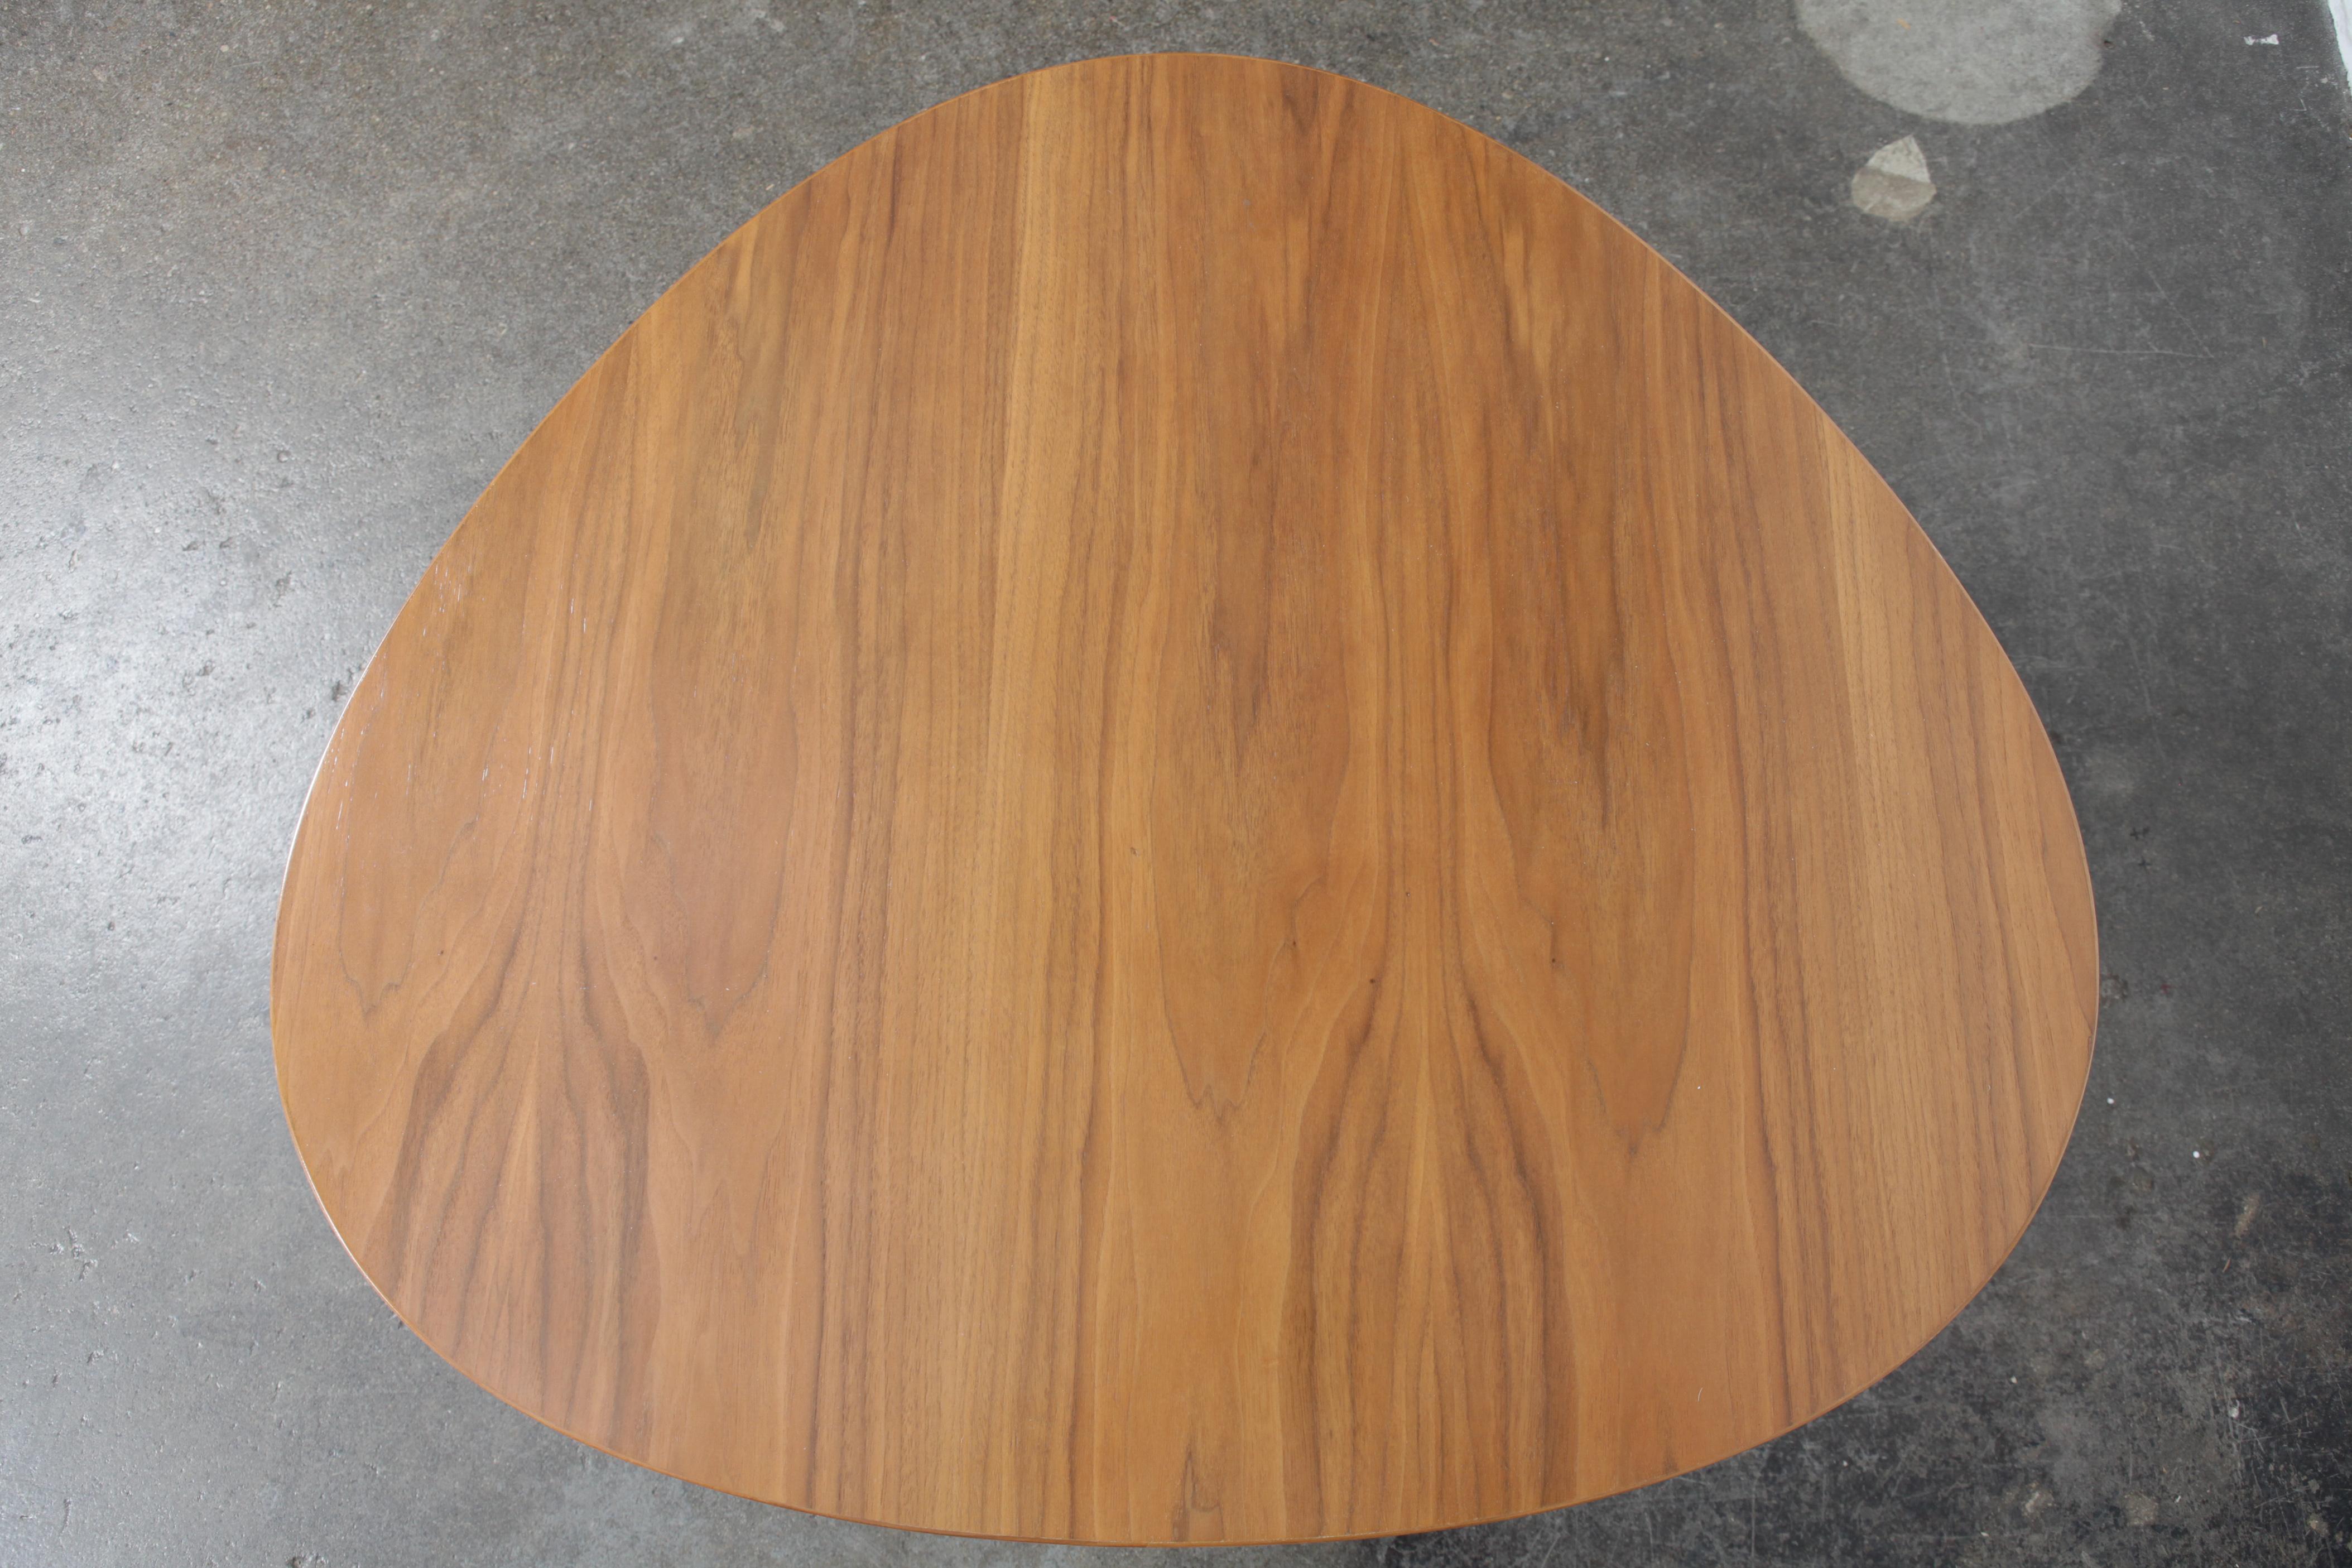 Mid-20th Century Midcentury Walnut Coffee Table with Organic Rounded Top and Leaf Style Legs